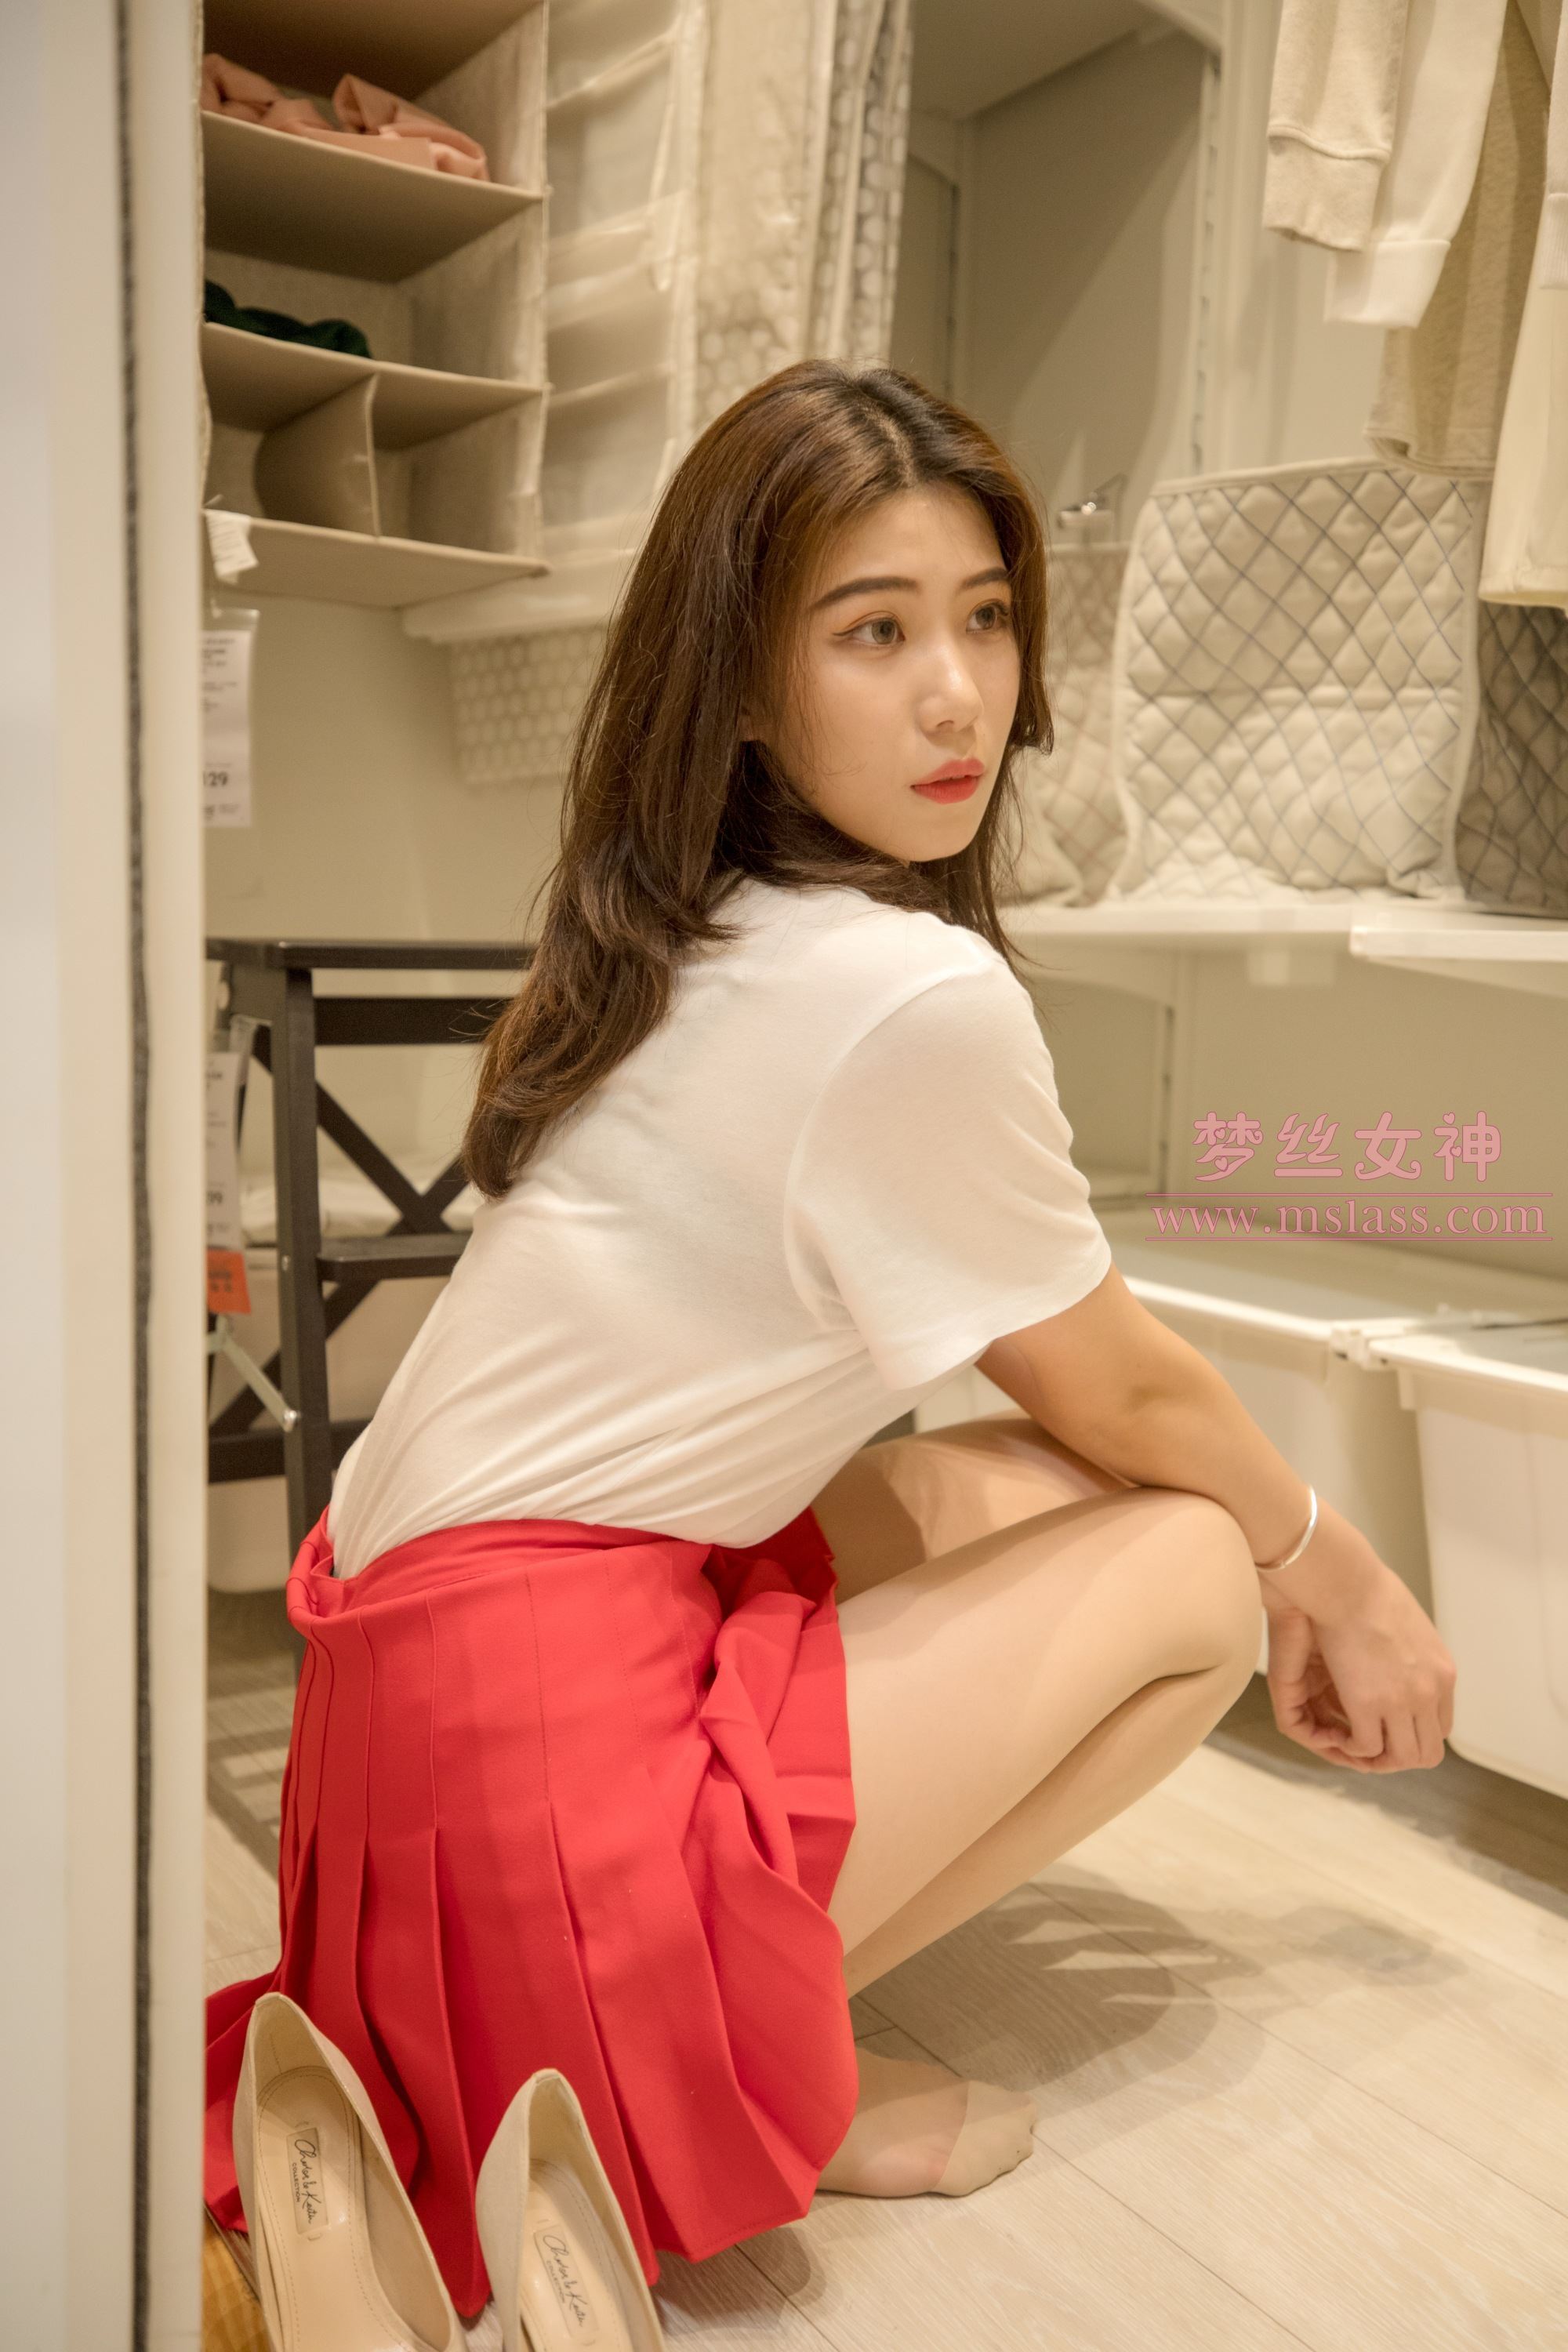 Mslass: the fitting room in the shopping mall on May 2, 2019